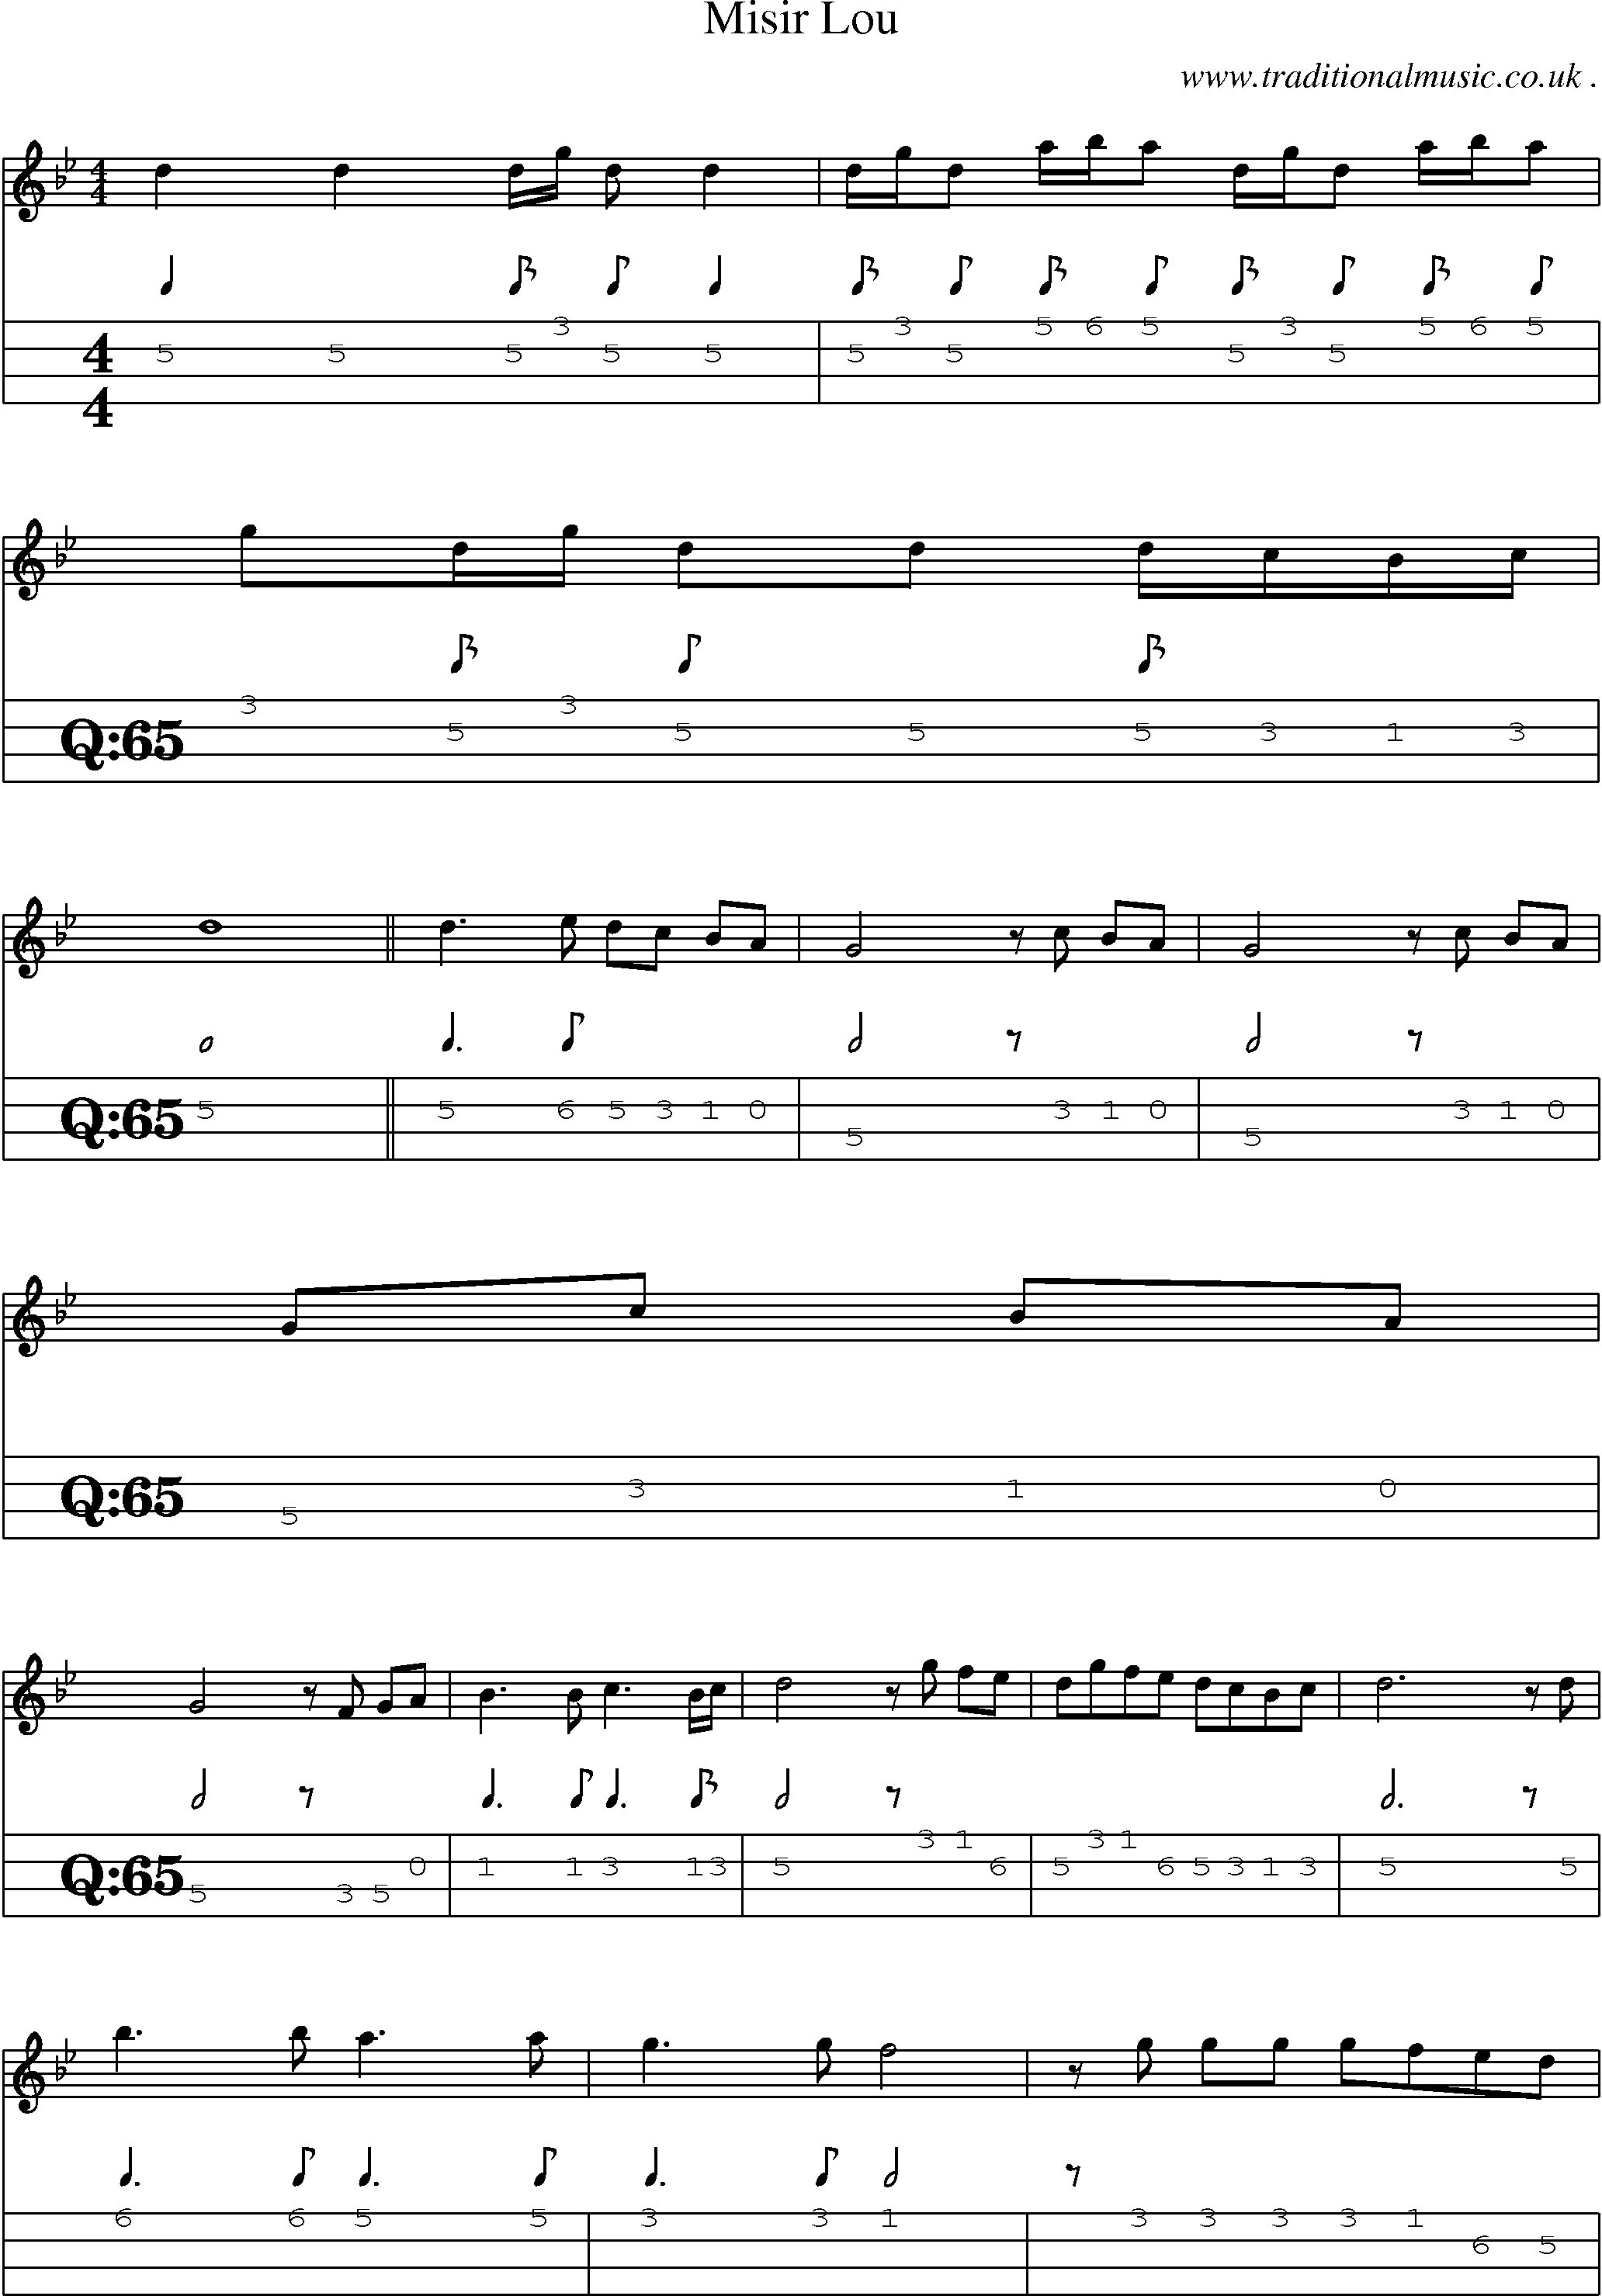 Sheet-Music and Mandolin Tabs for Misir Lou